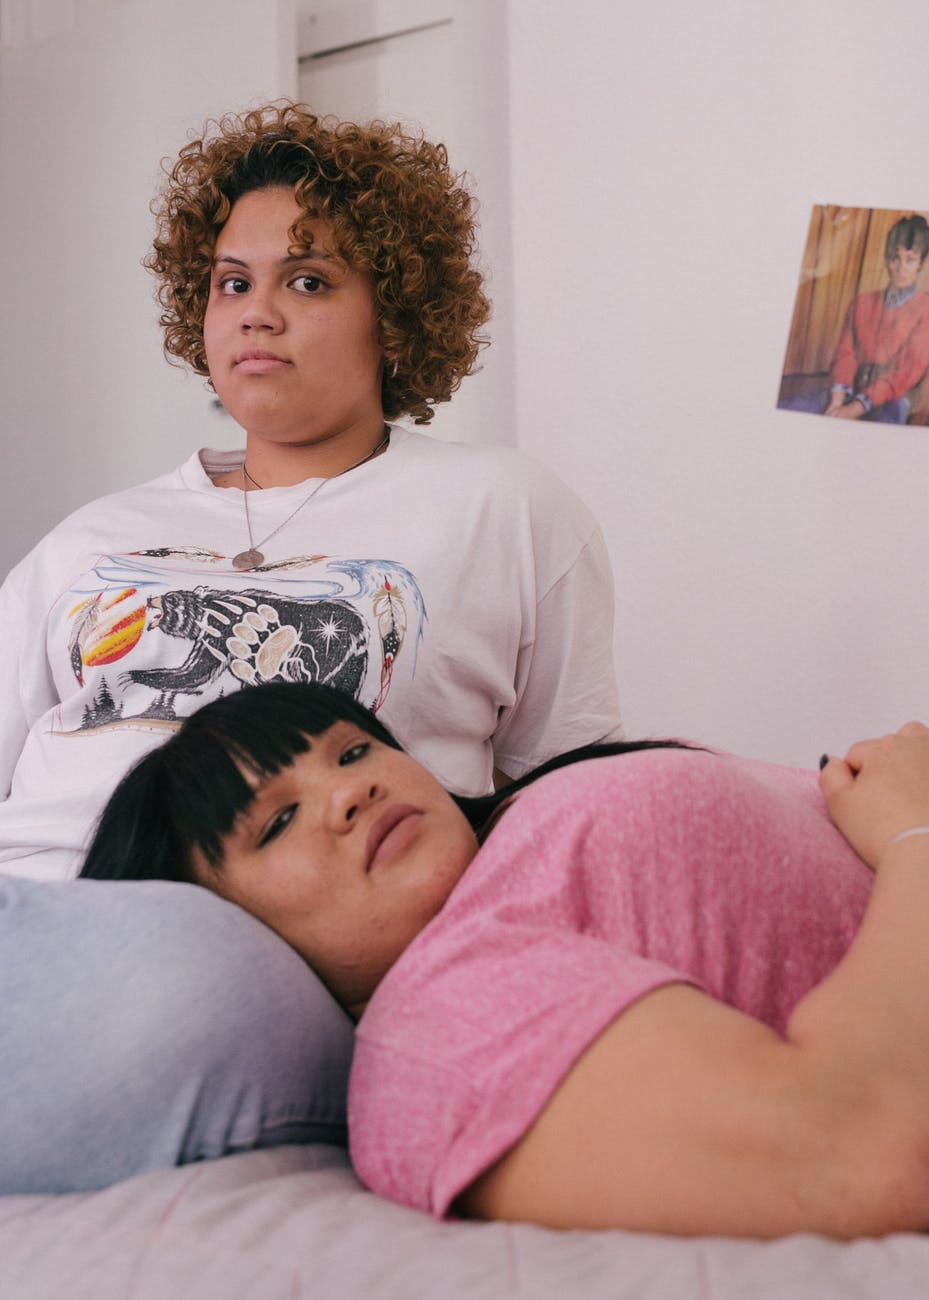 plus size lesbians relaxing in room